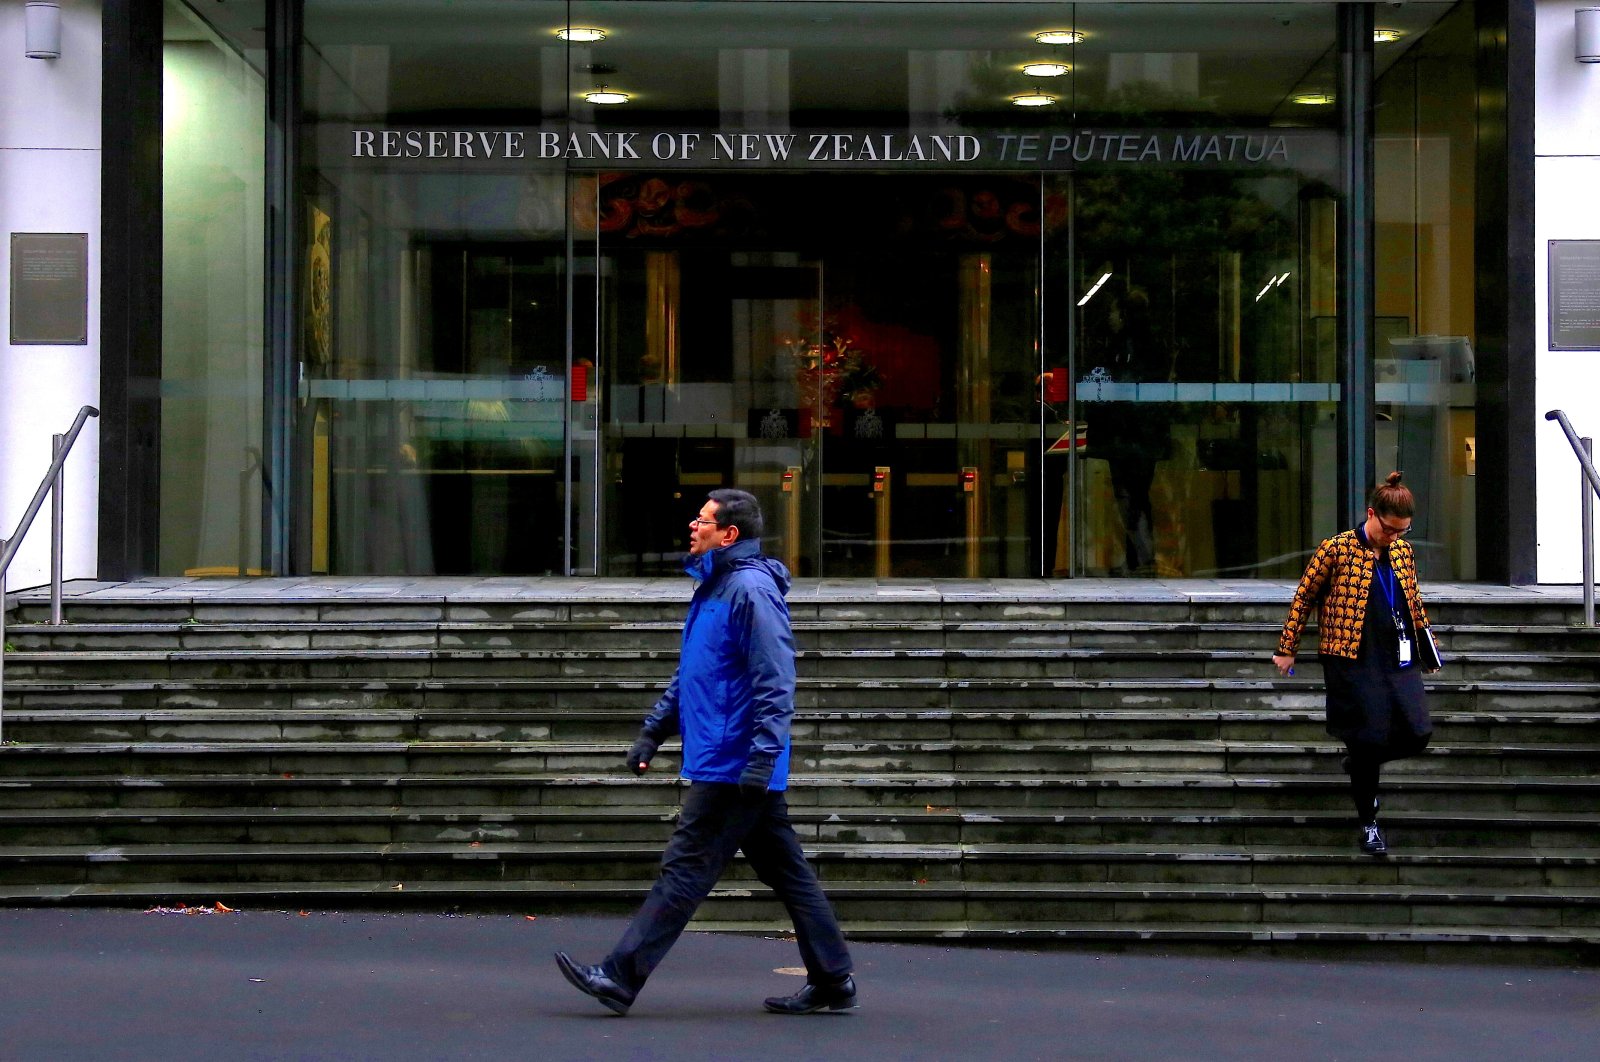 Pedestrians walk near the main entrance to the Reserve Bank of New Zealand located in central Wellington, New Zealand, July 3, 2017. (Reuters Photo)